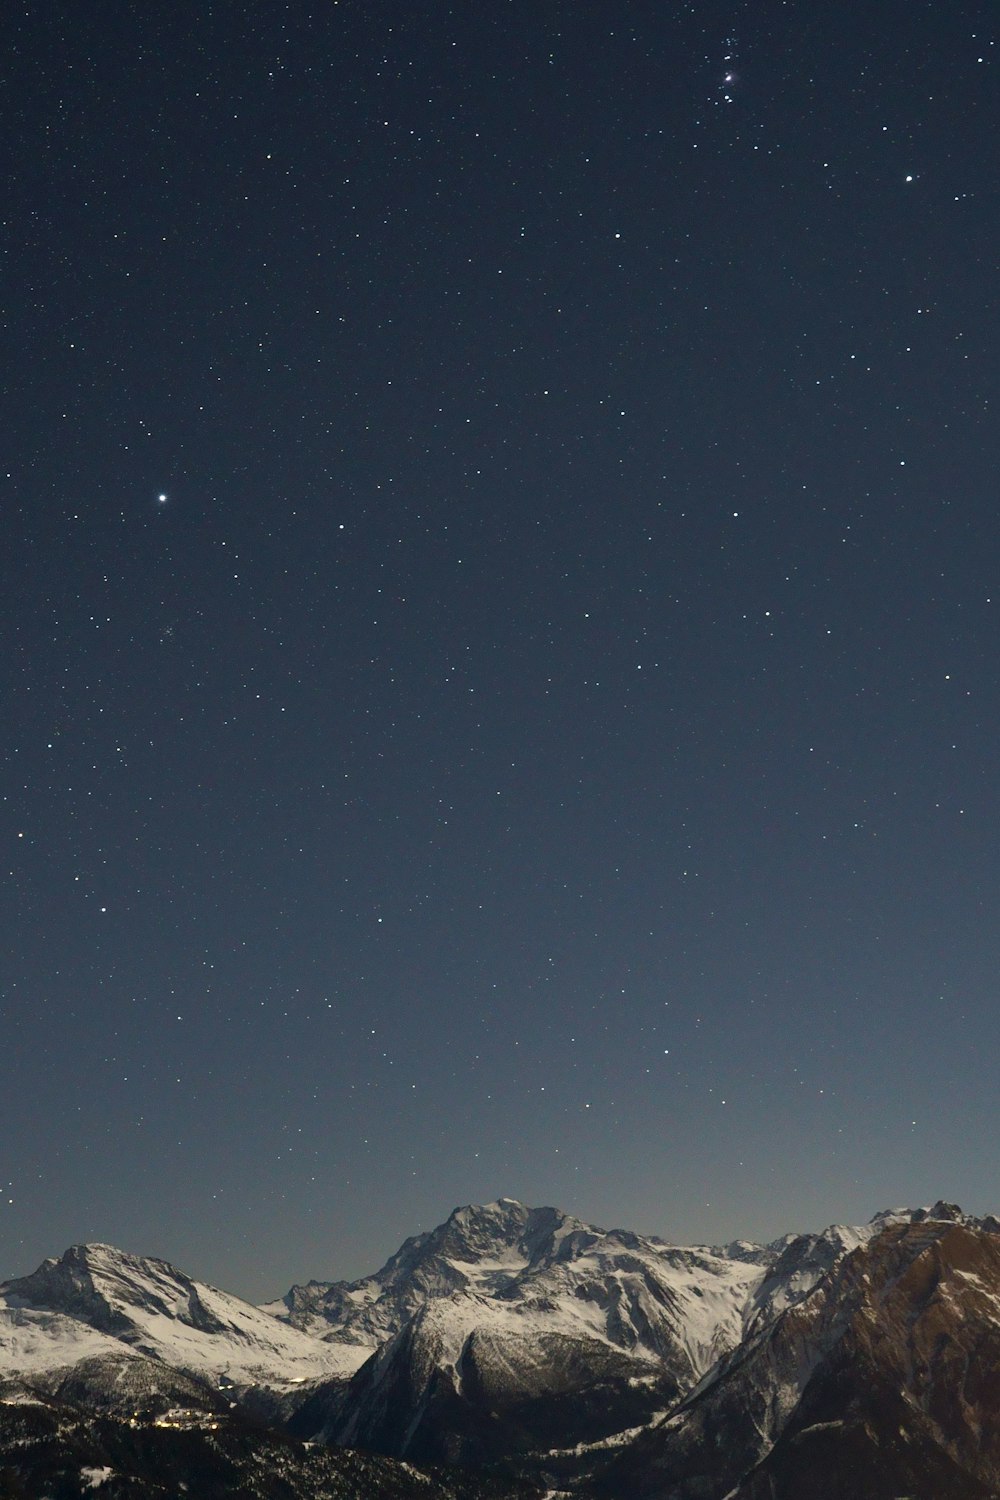 the night sky over a mountain range with stars in the sky